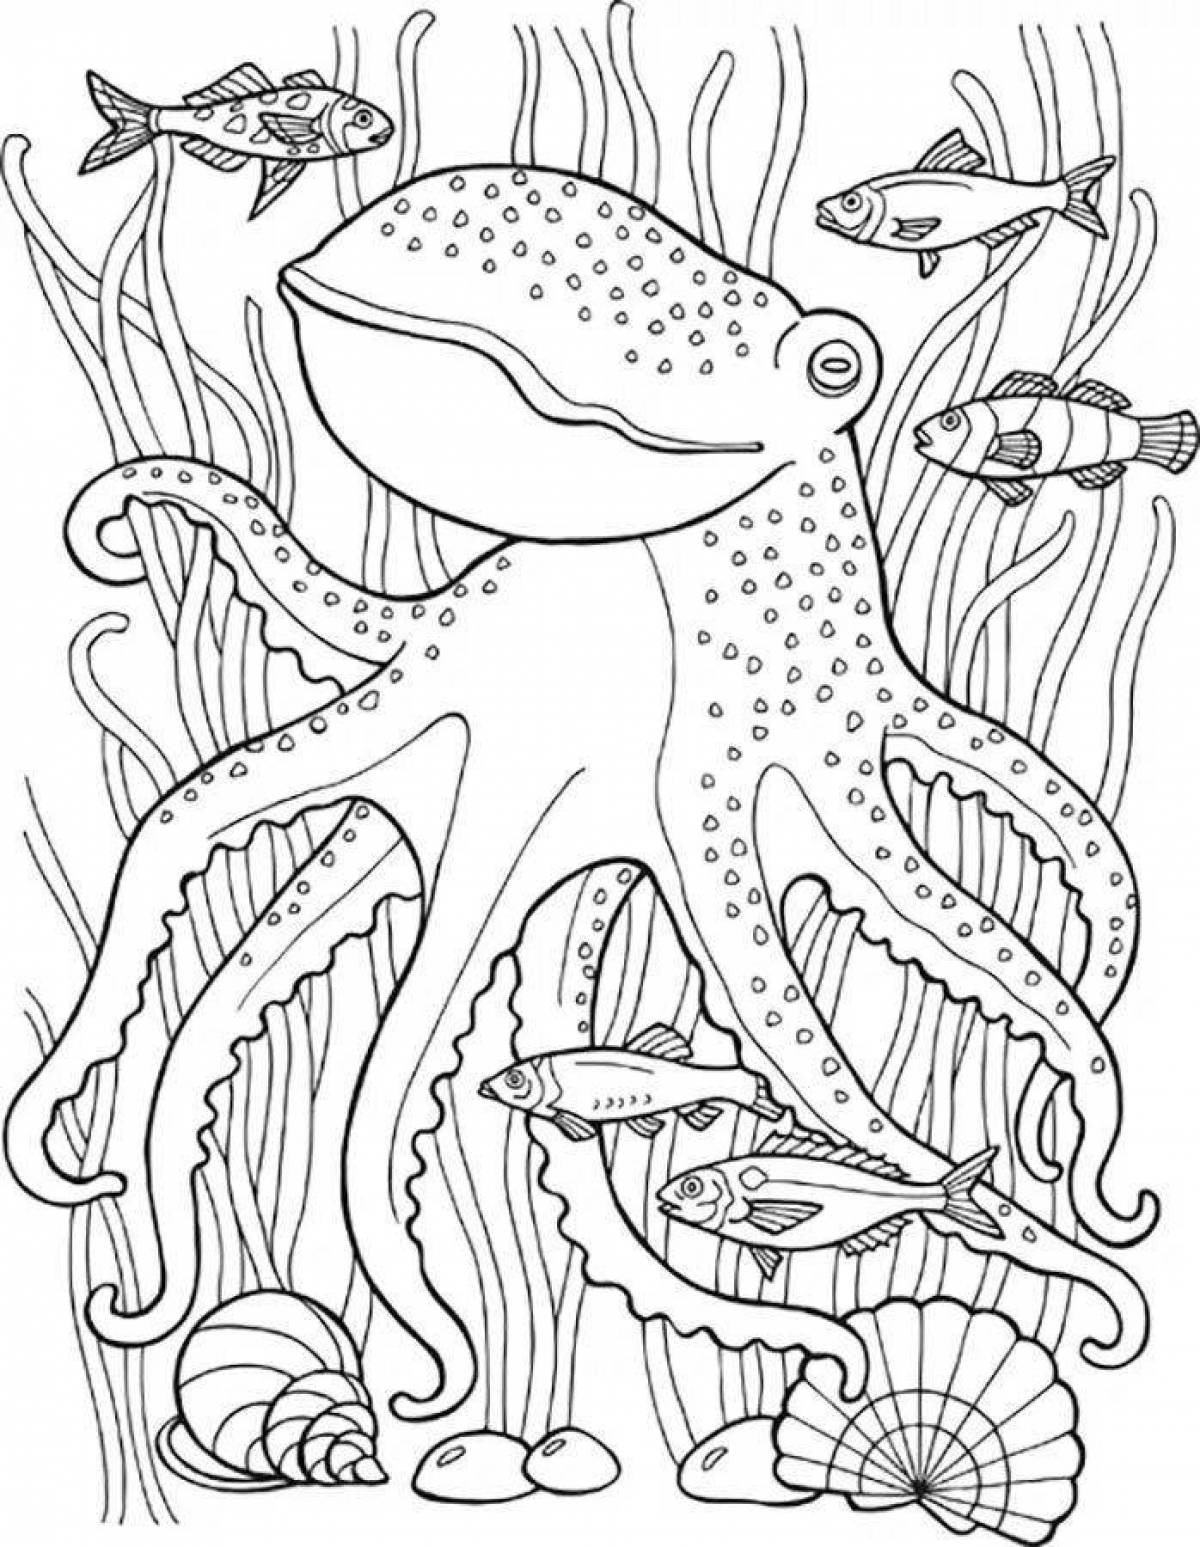 Colorful sea world coloring page